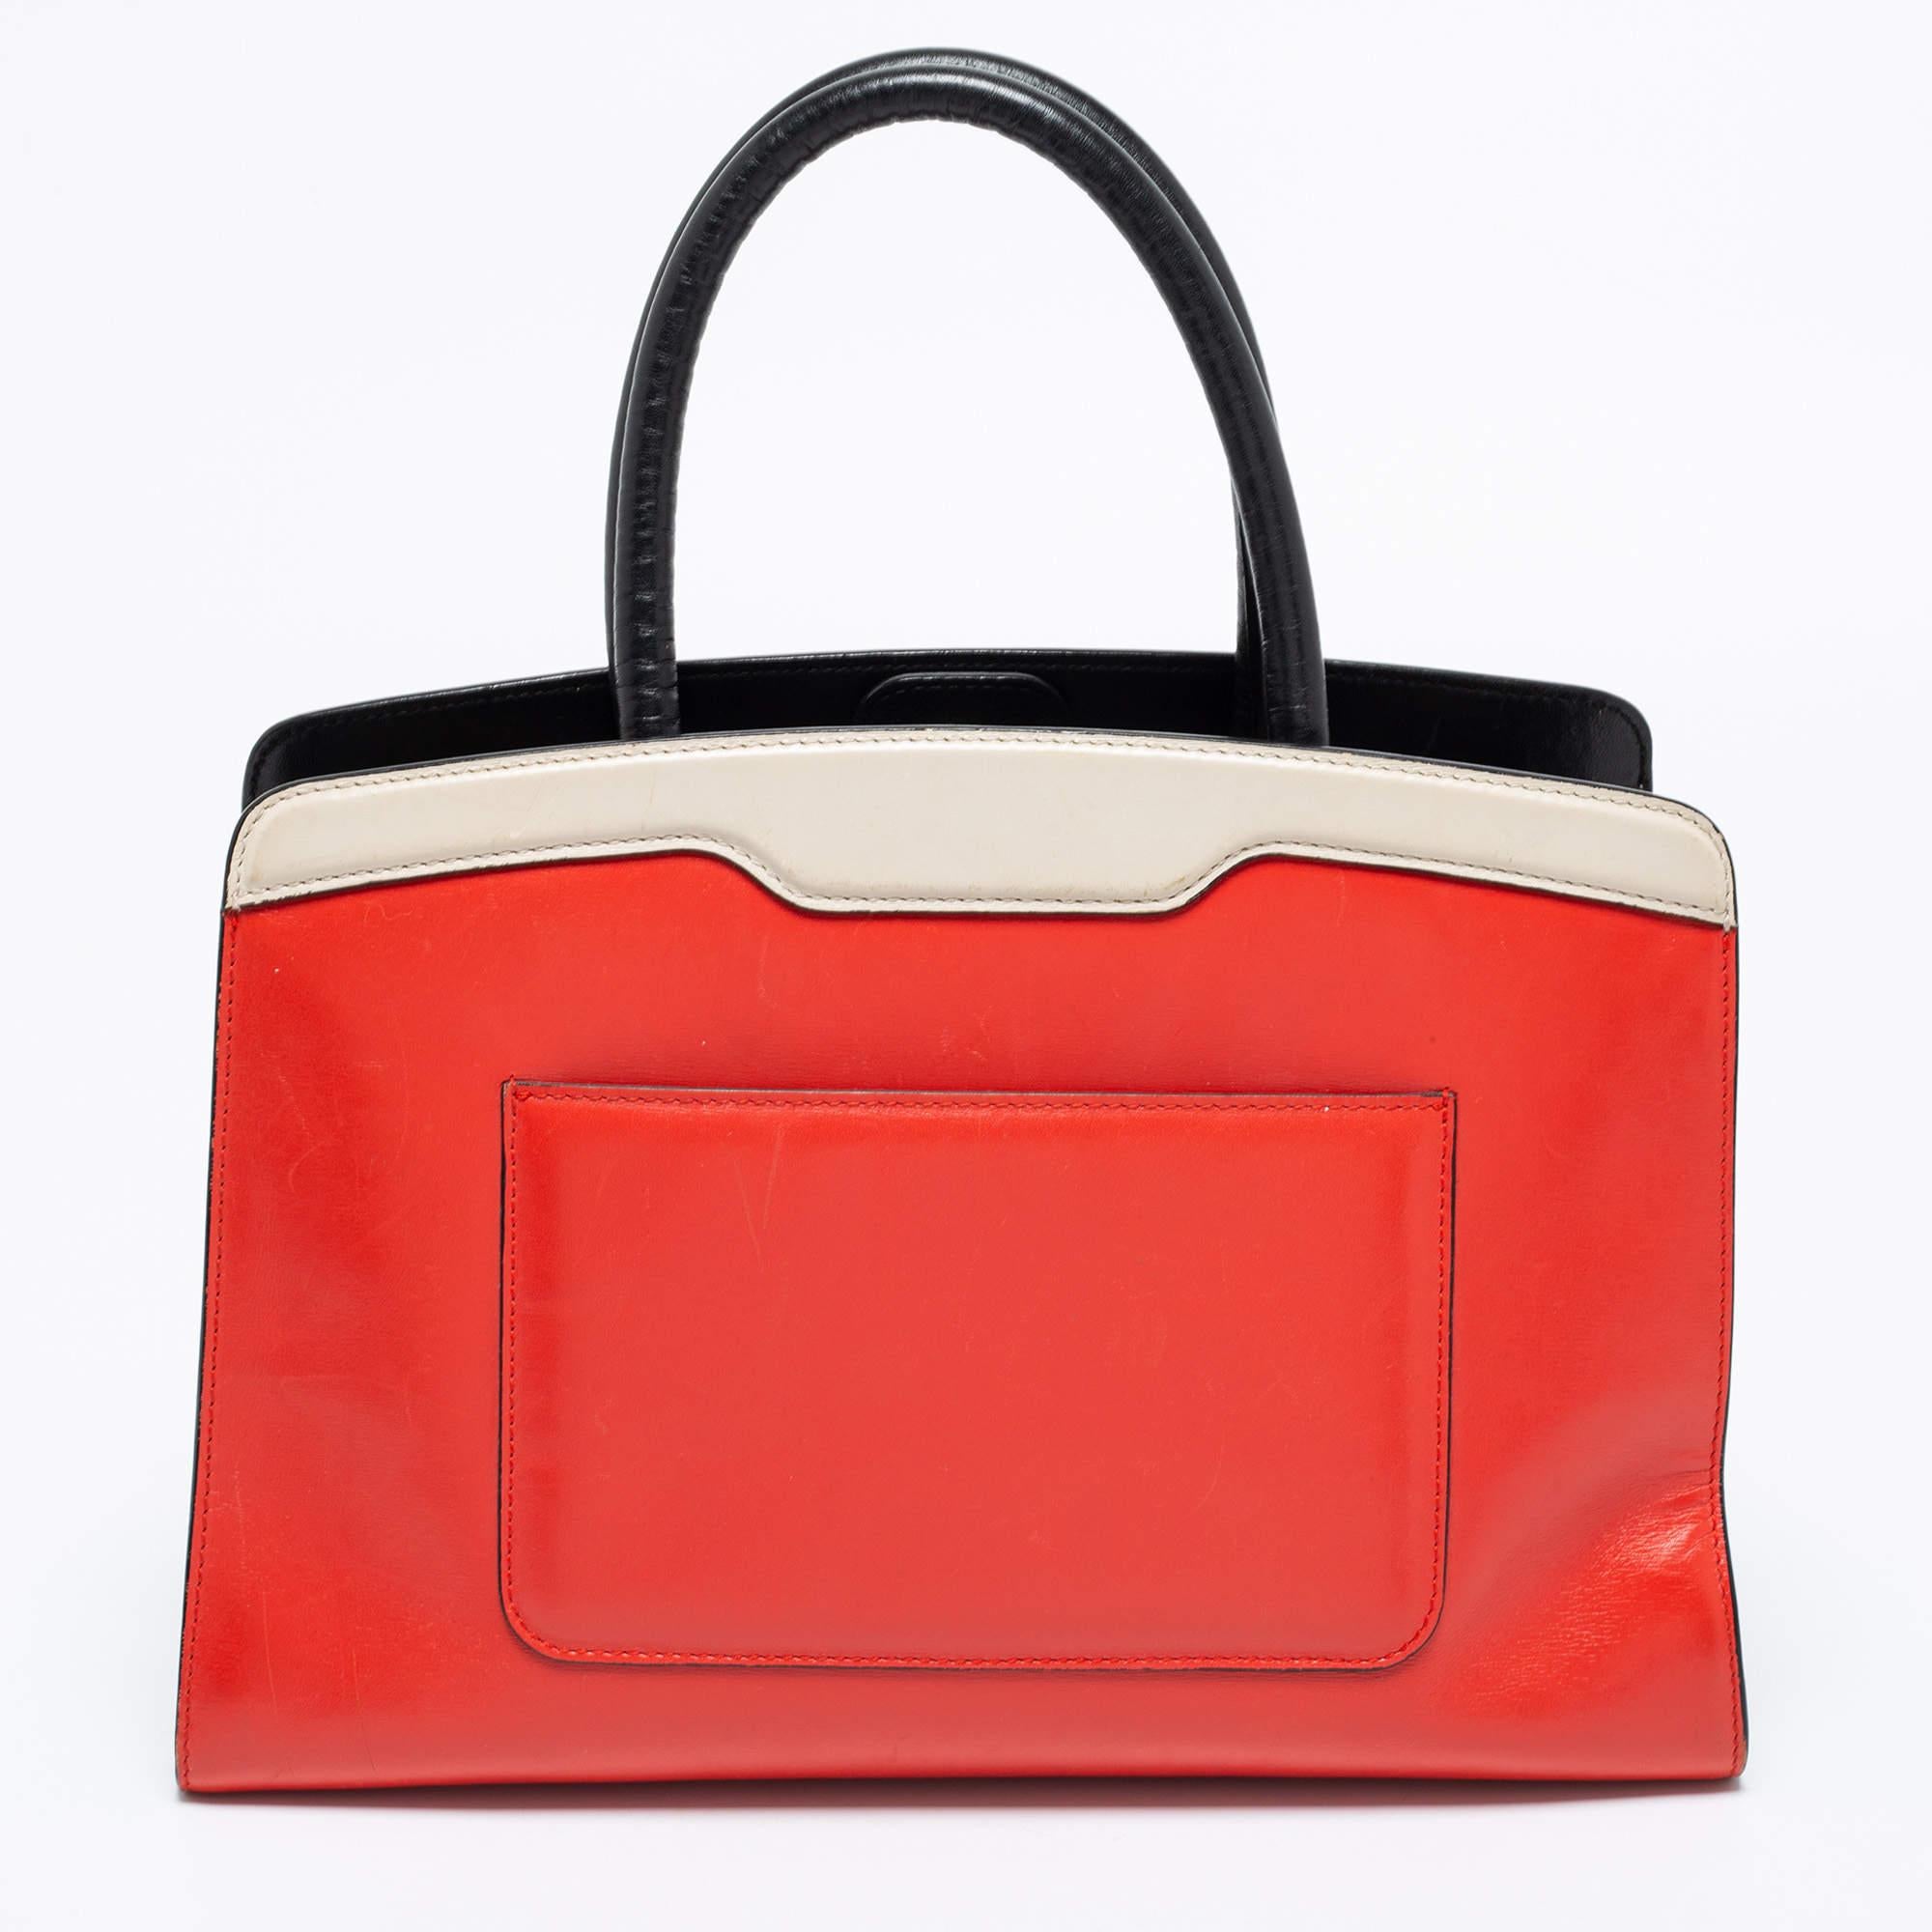 This Isabella Rossellini tote comes from the House of Bvlgari. It is crafted from multicolored leather on the exterior. It features two handles, gold-toned hardware, and a leather-lined interior. It comes with an adjustable 45 cm shoulder strap.